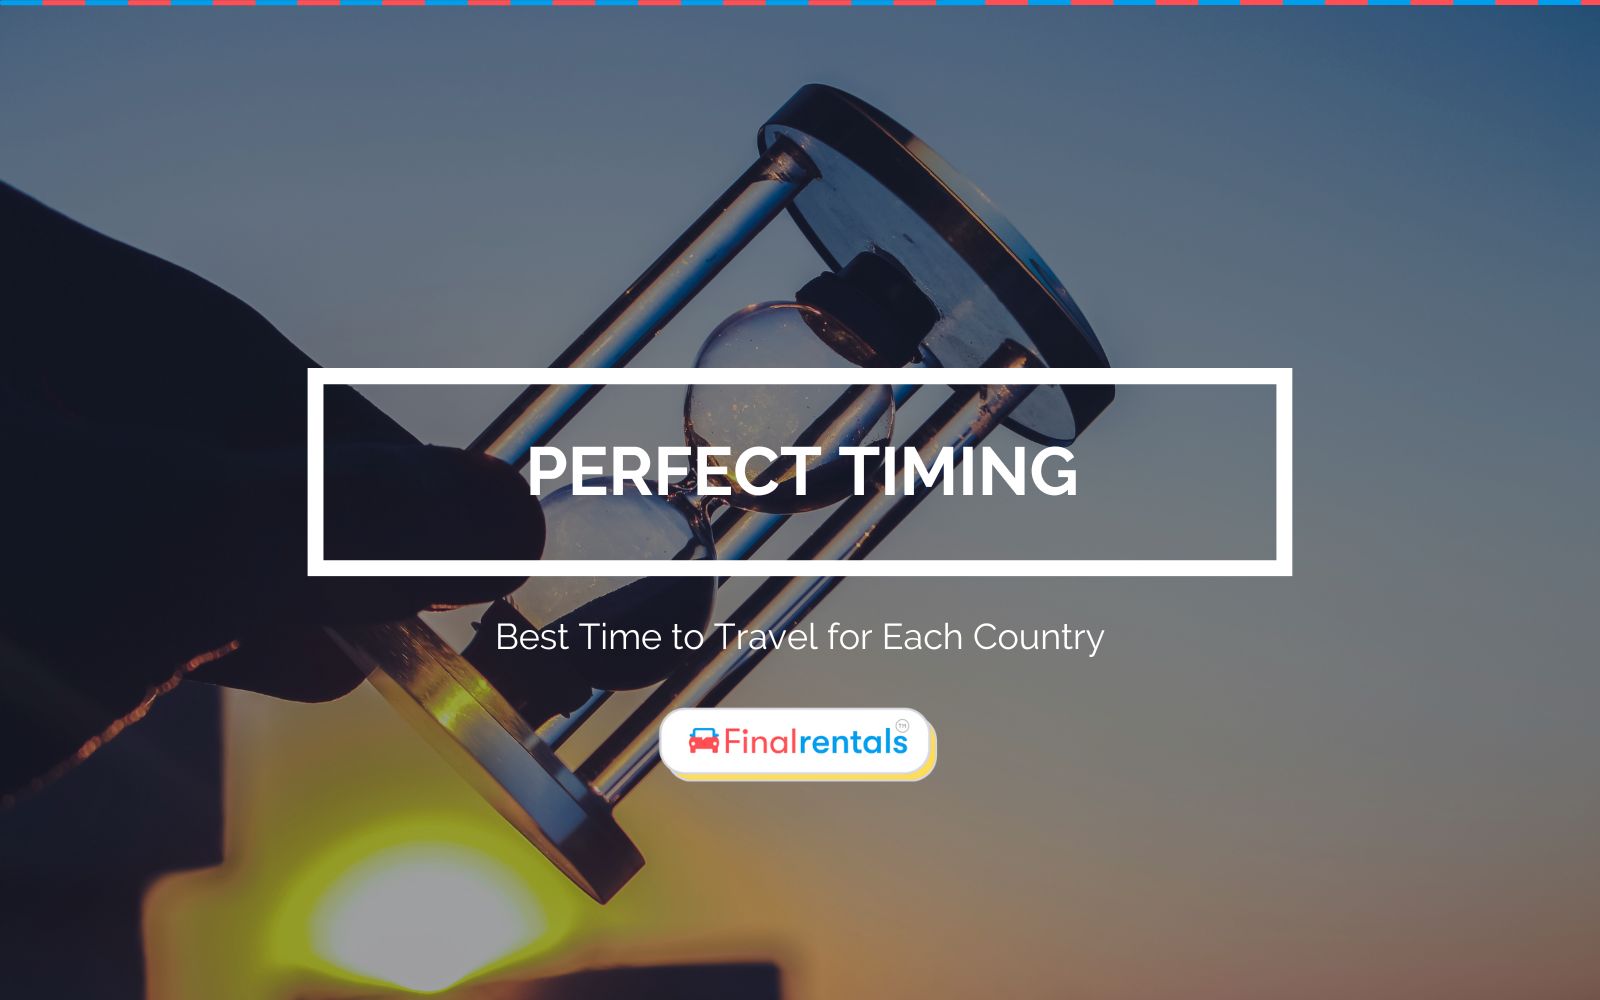 Best Time to Travel for Each Country